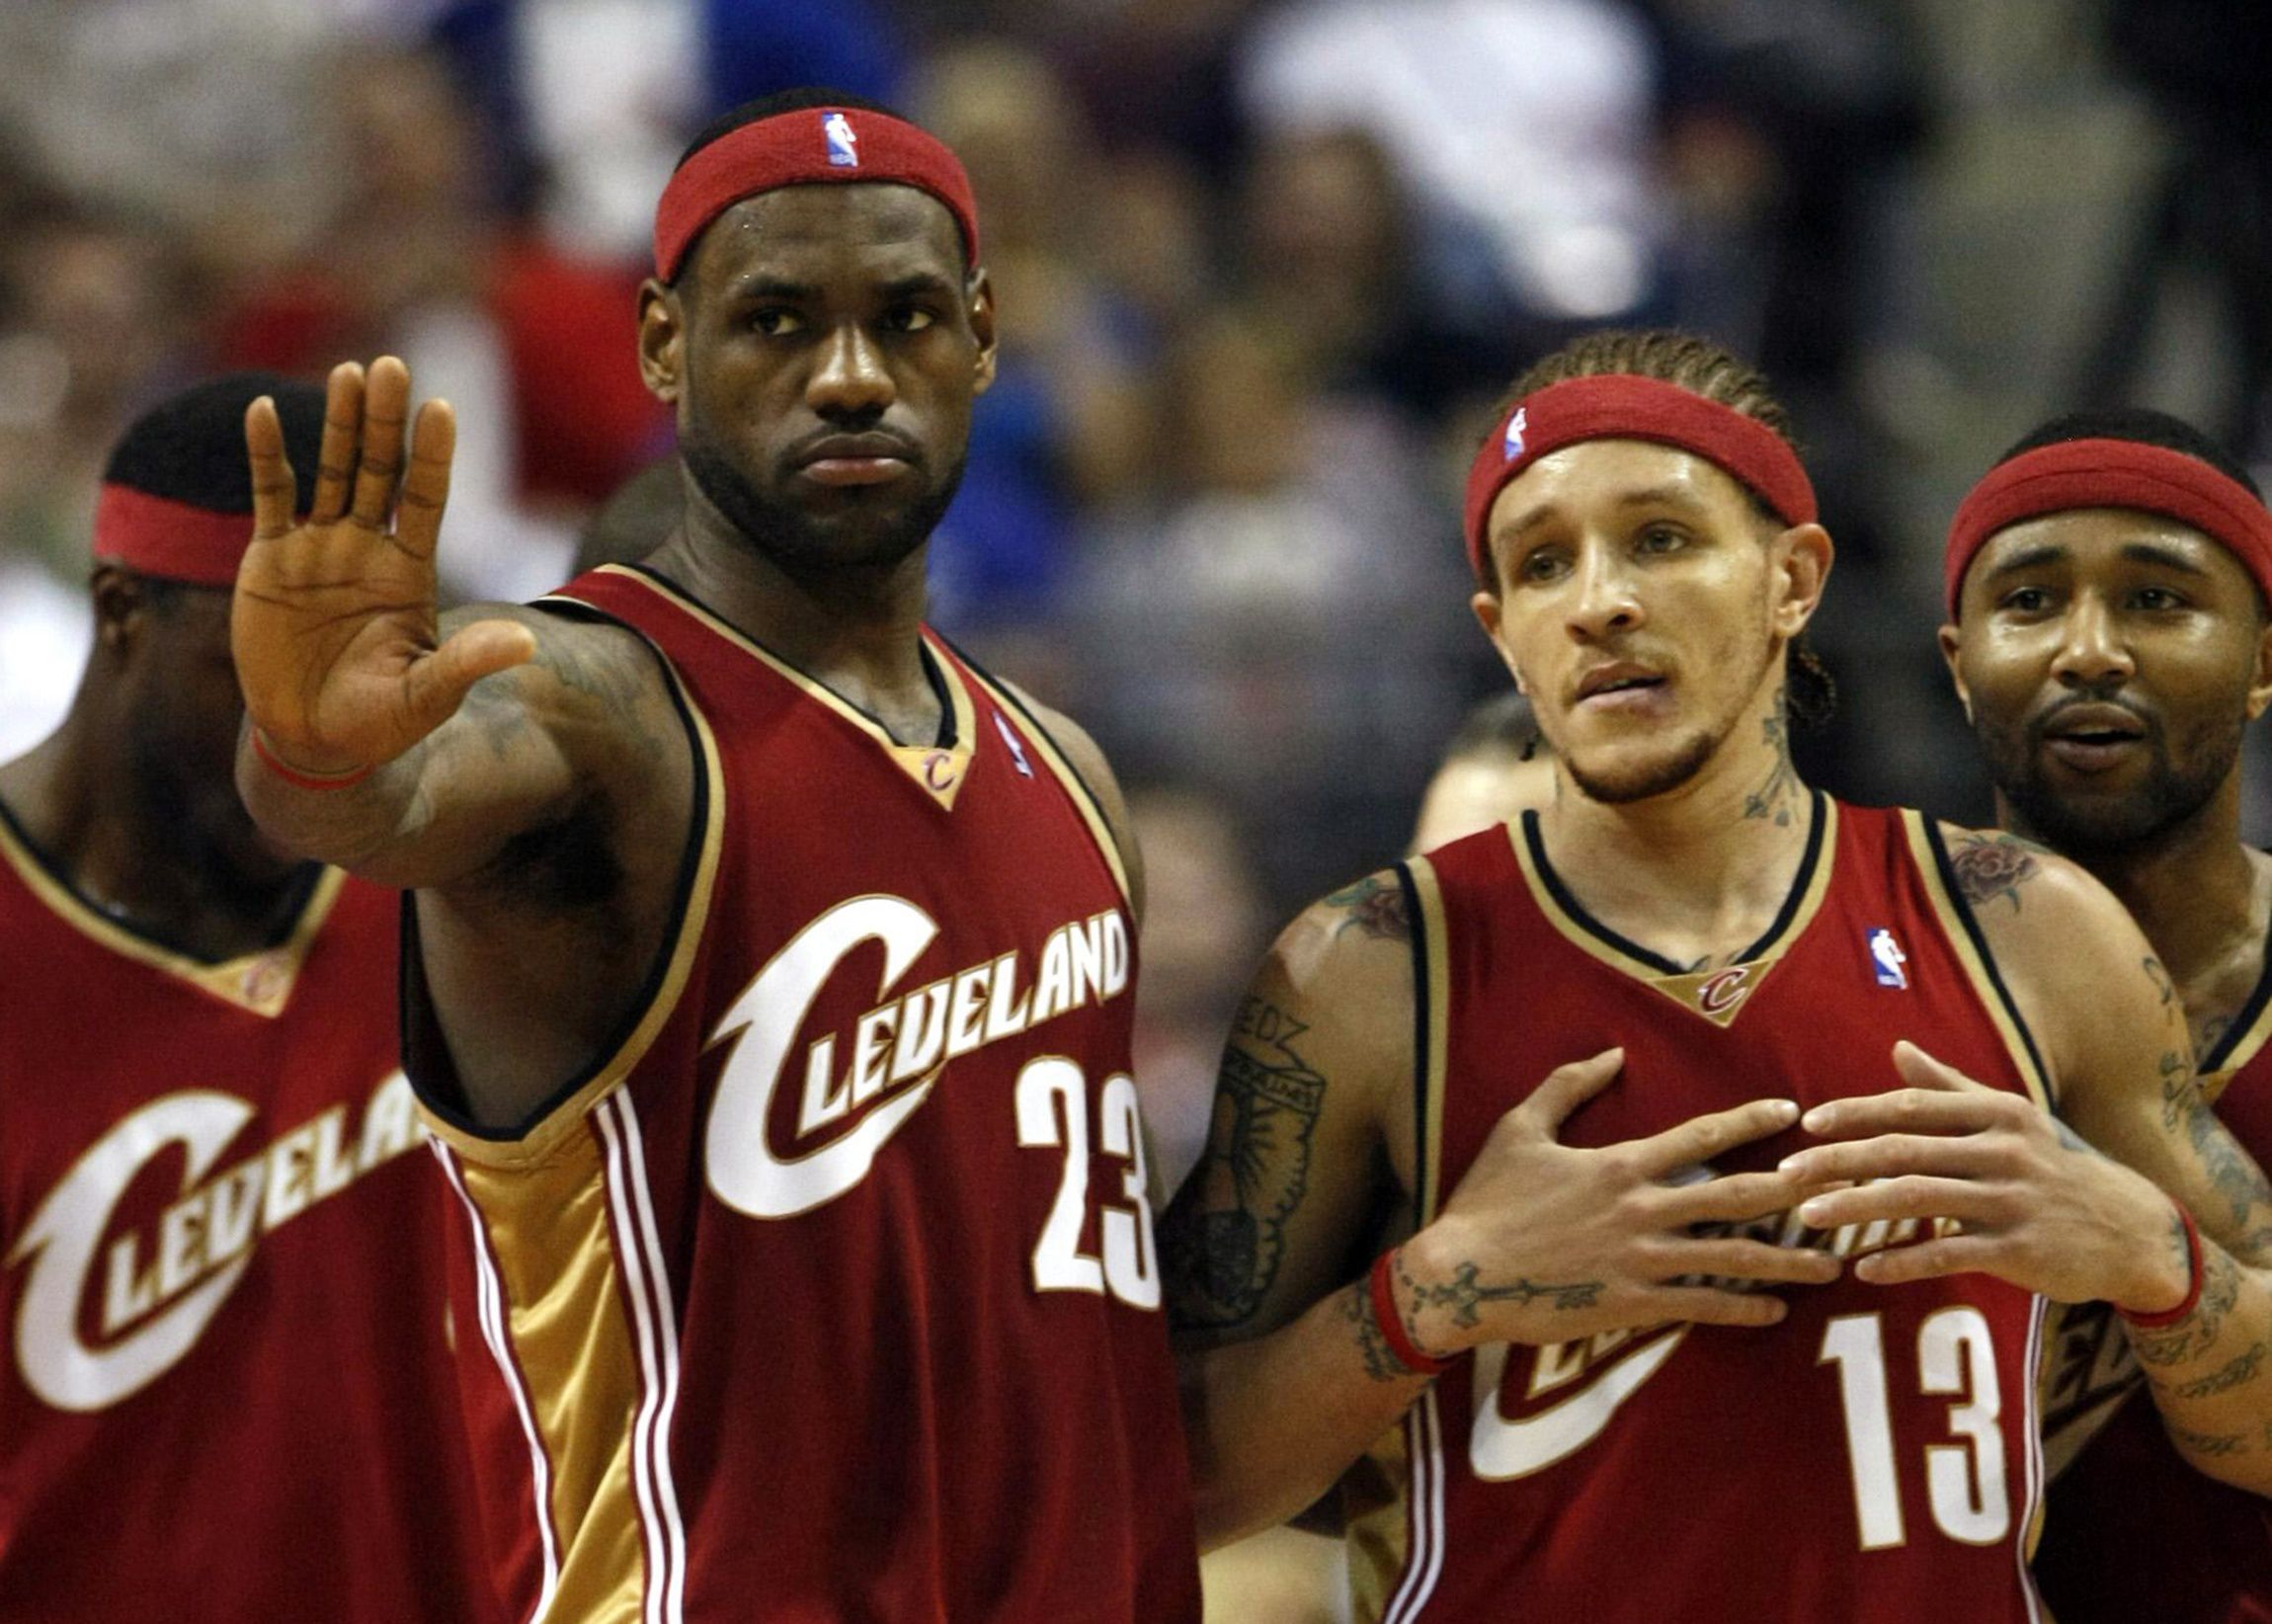 Prince George's Officer Shot Video of Ex-NBA Player Delonte West